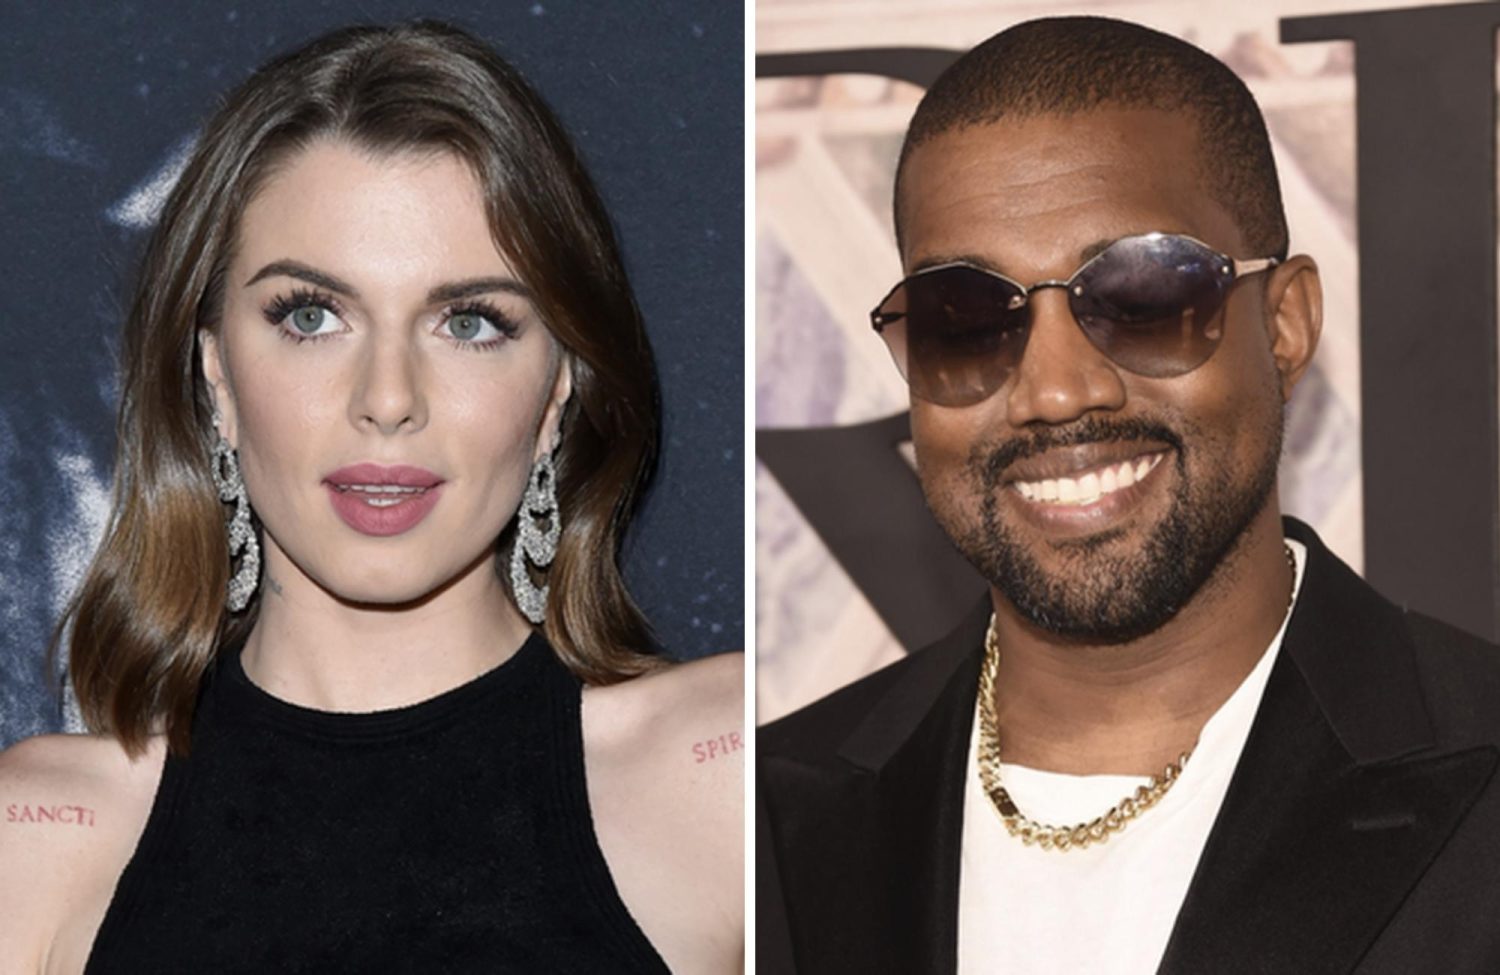 Kuwtk: Kanye West & Julia Fox Reportedly Dating After Being Seen Together